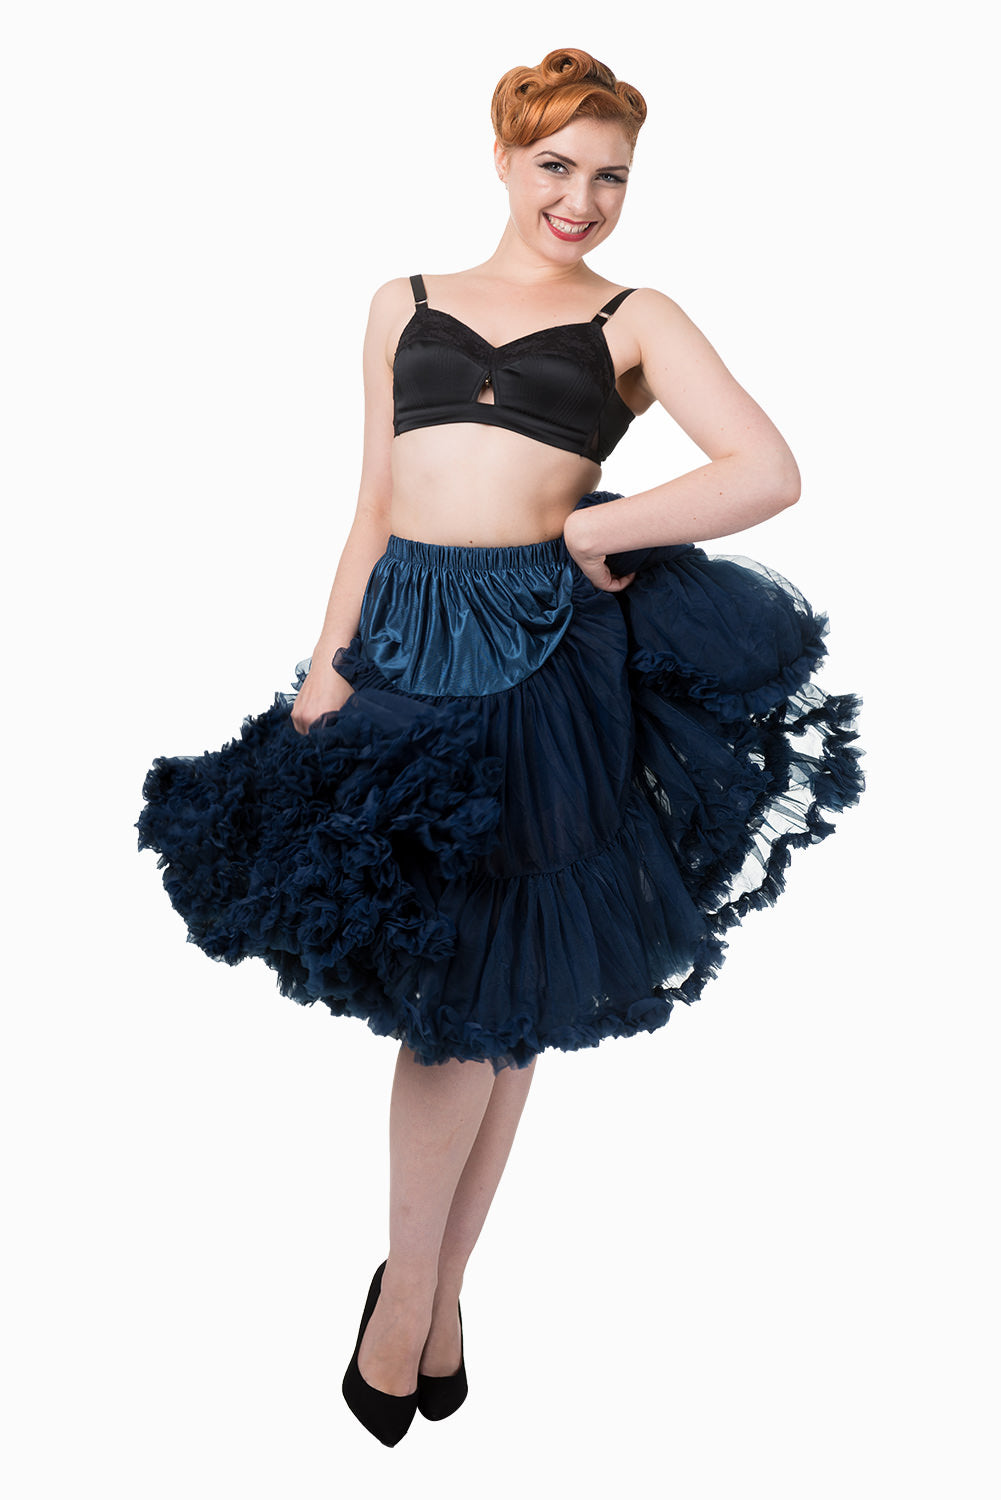 Dancing Days Lifeforms 50s Style 25"-27" Long Petticoat In Navy Blue; Dancing Days; Lifeforms Petticoat; 50s Style; 25"-27" Long Petticoat; Navy Blue; Layer Effect View